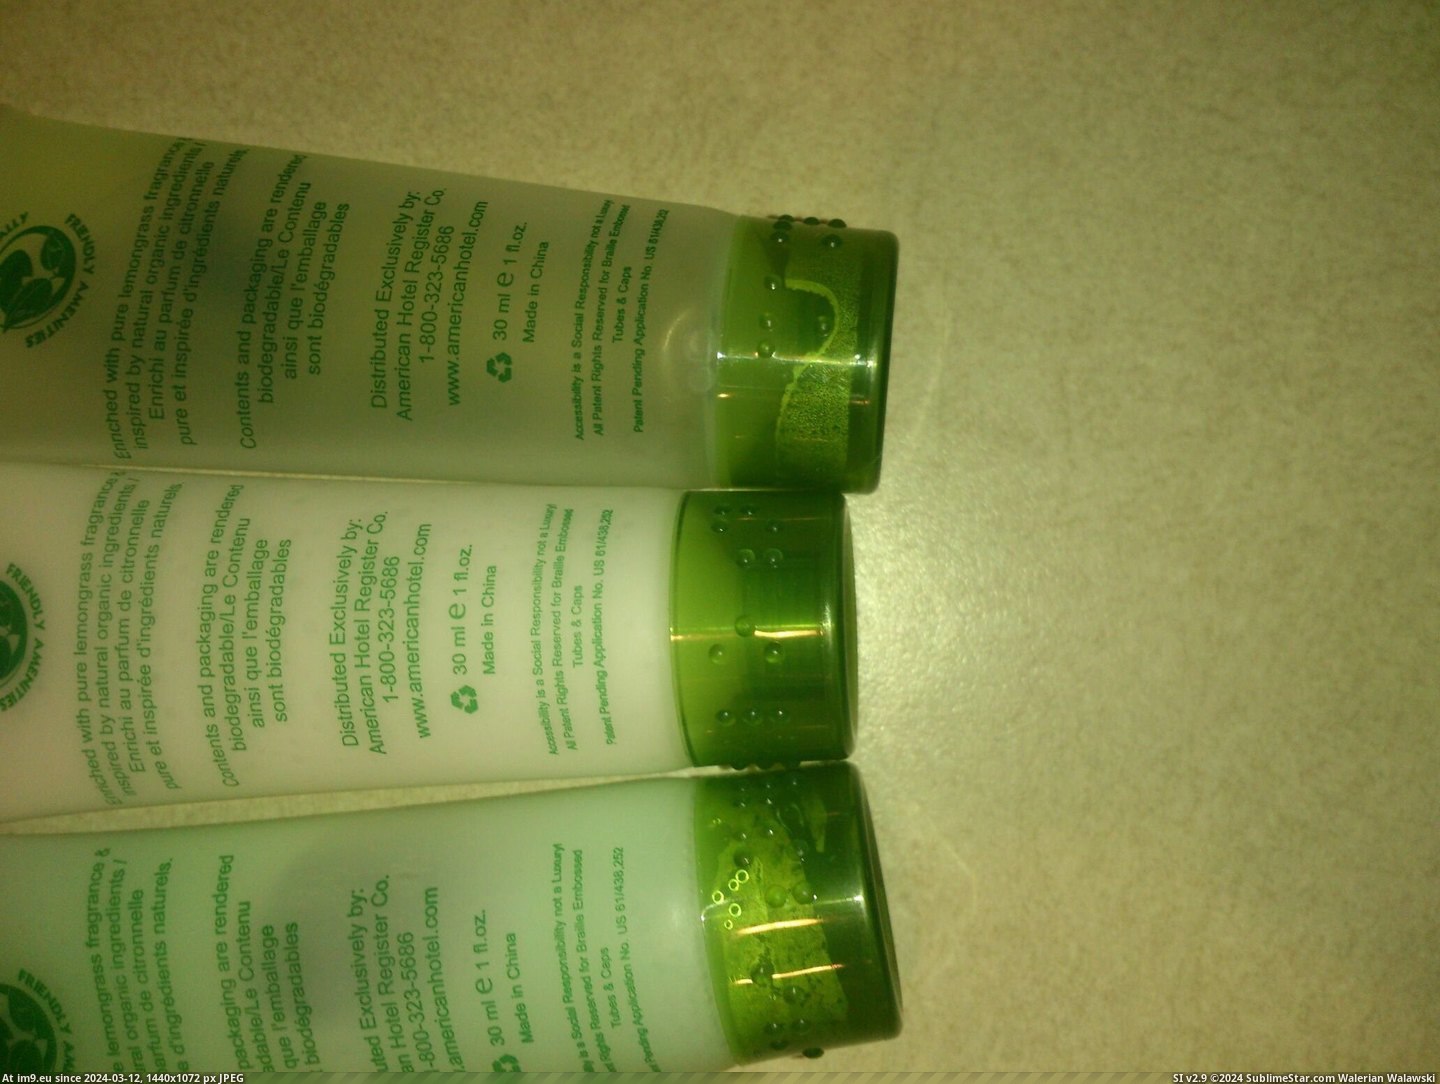 #Body #Hotel #Braille #Conditioner #Shampoo #Lotion [Mildlyinteresting] The hotel body lotion, shampoo and conditioner have braille on them Pic. (Image of album My r/MILDLYINTERESTING favs))